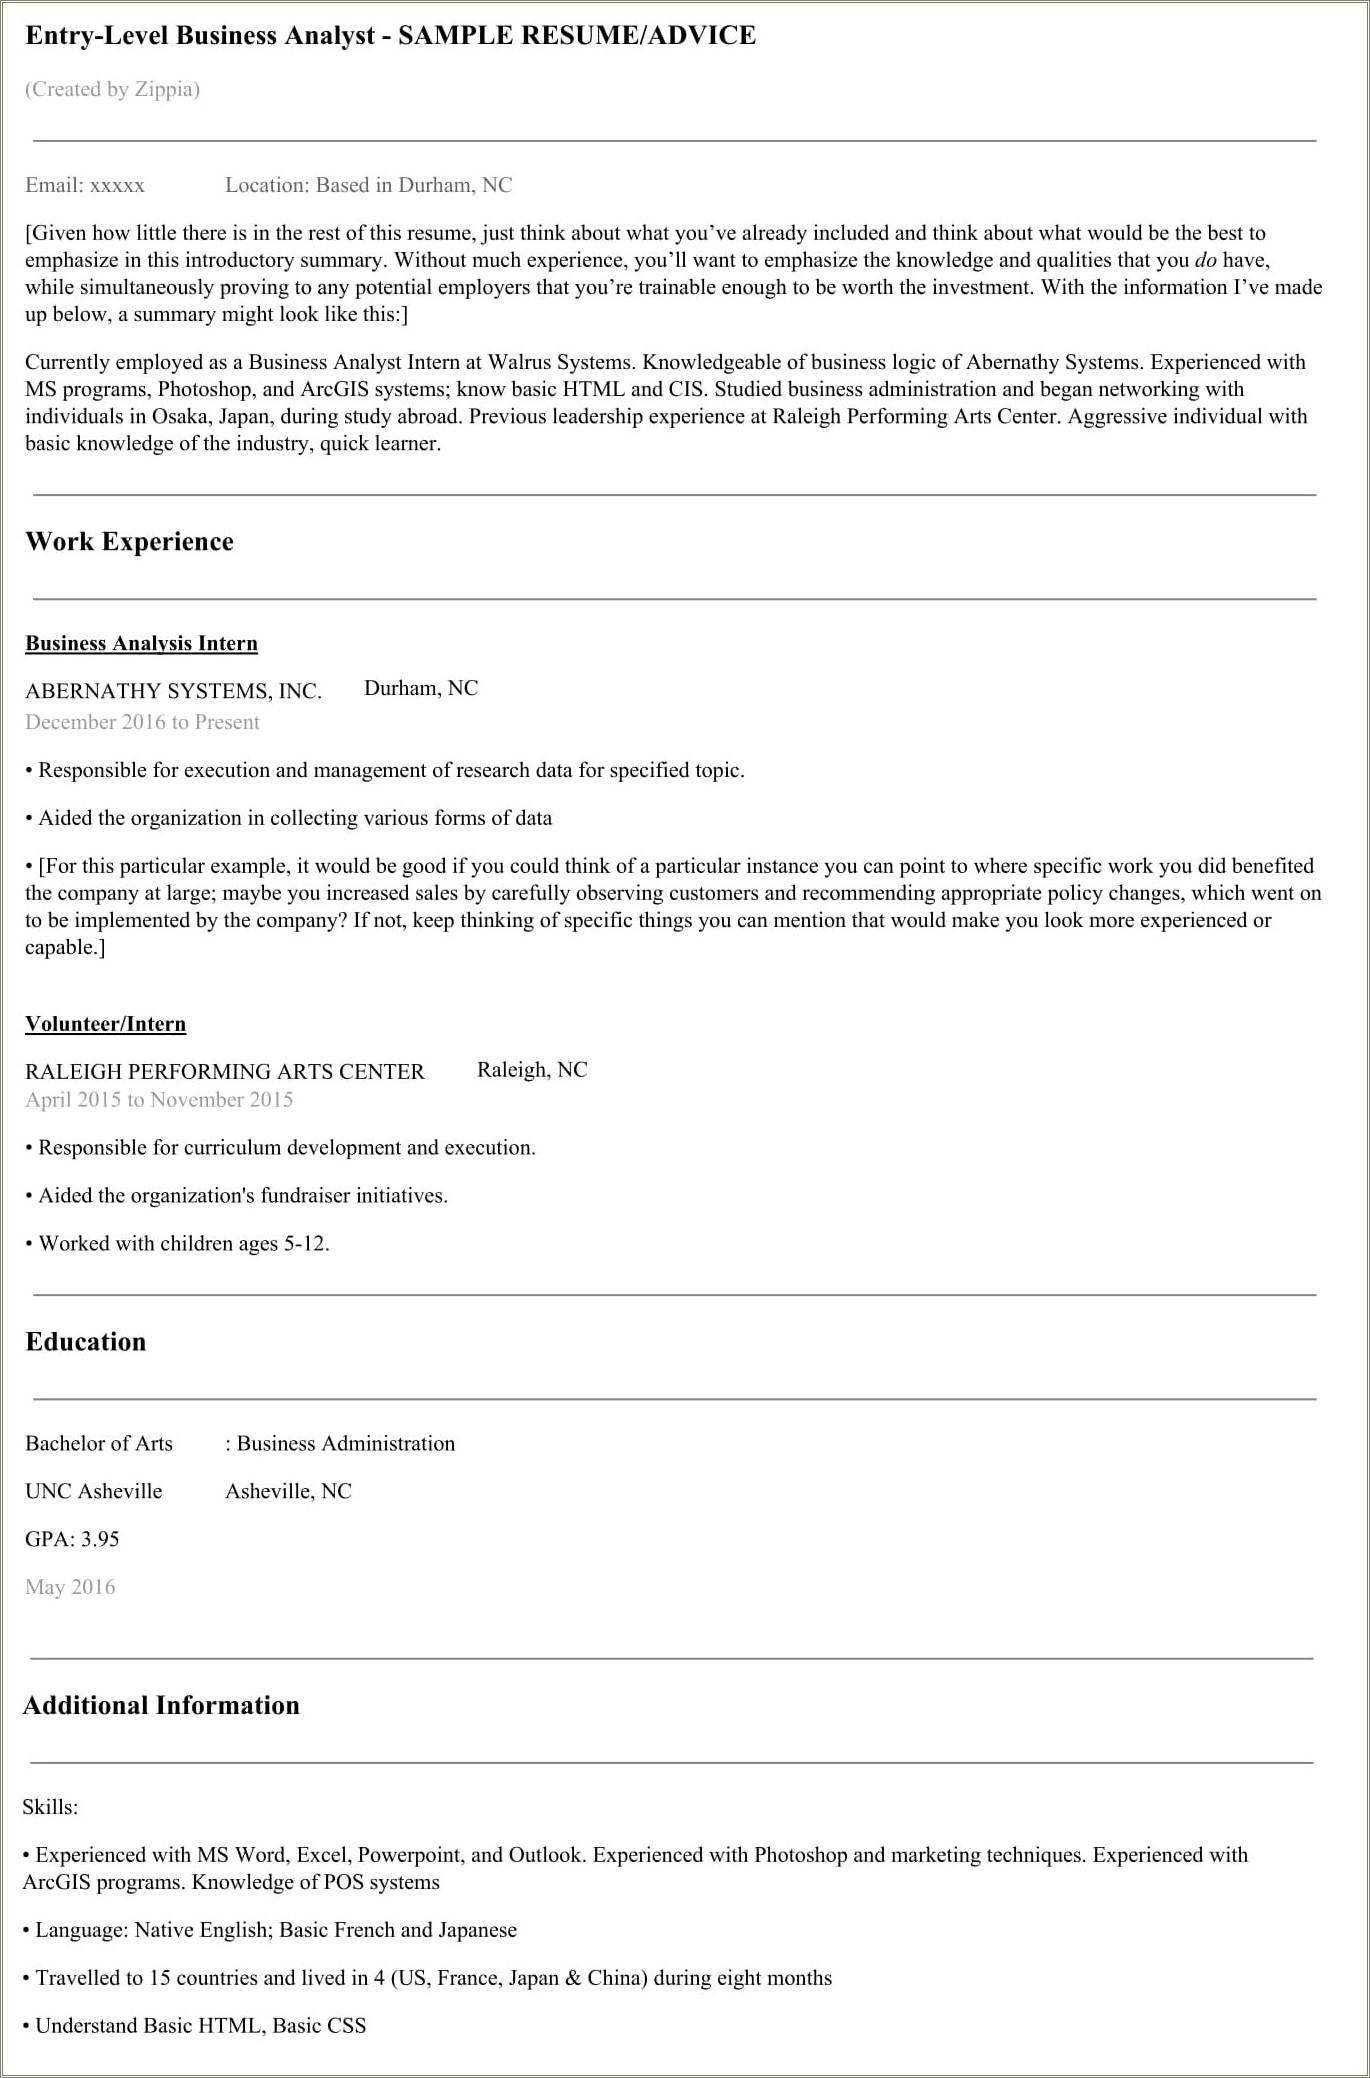 Resume Objective For Business Analyst Internship